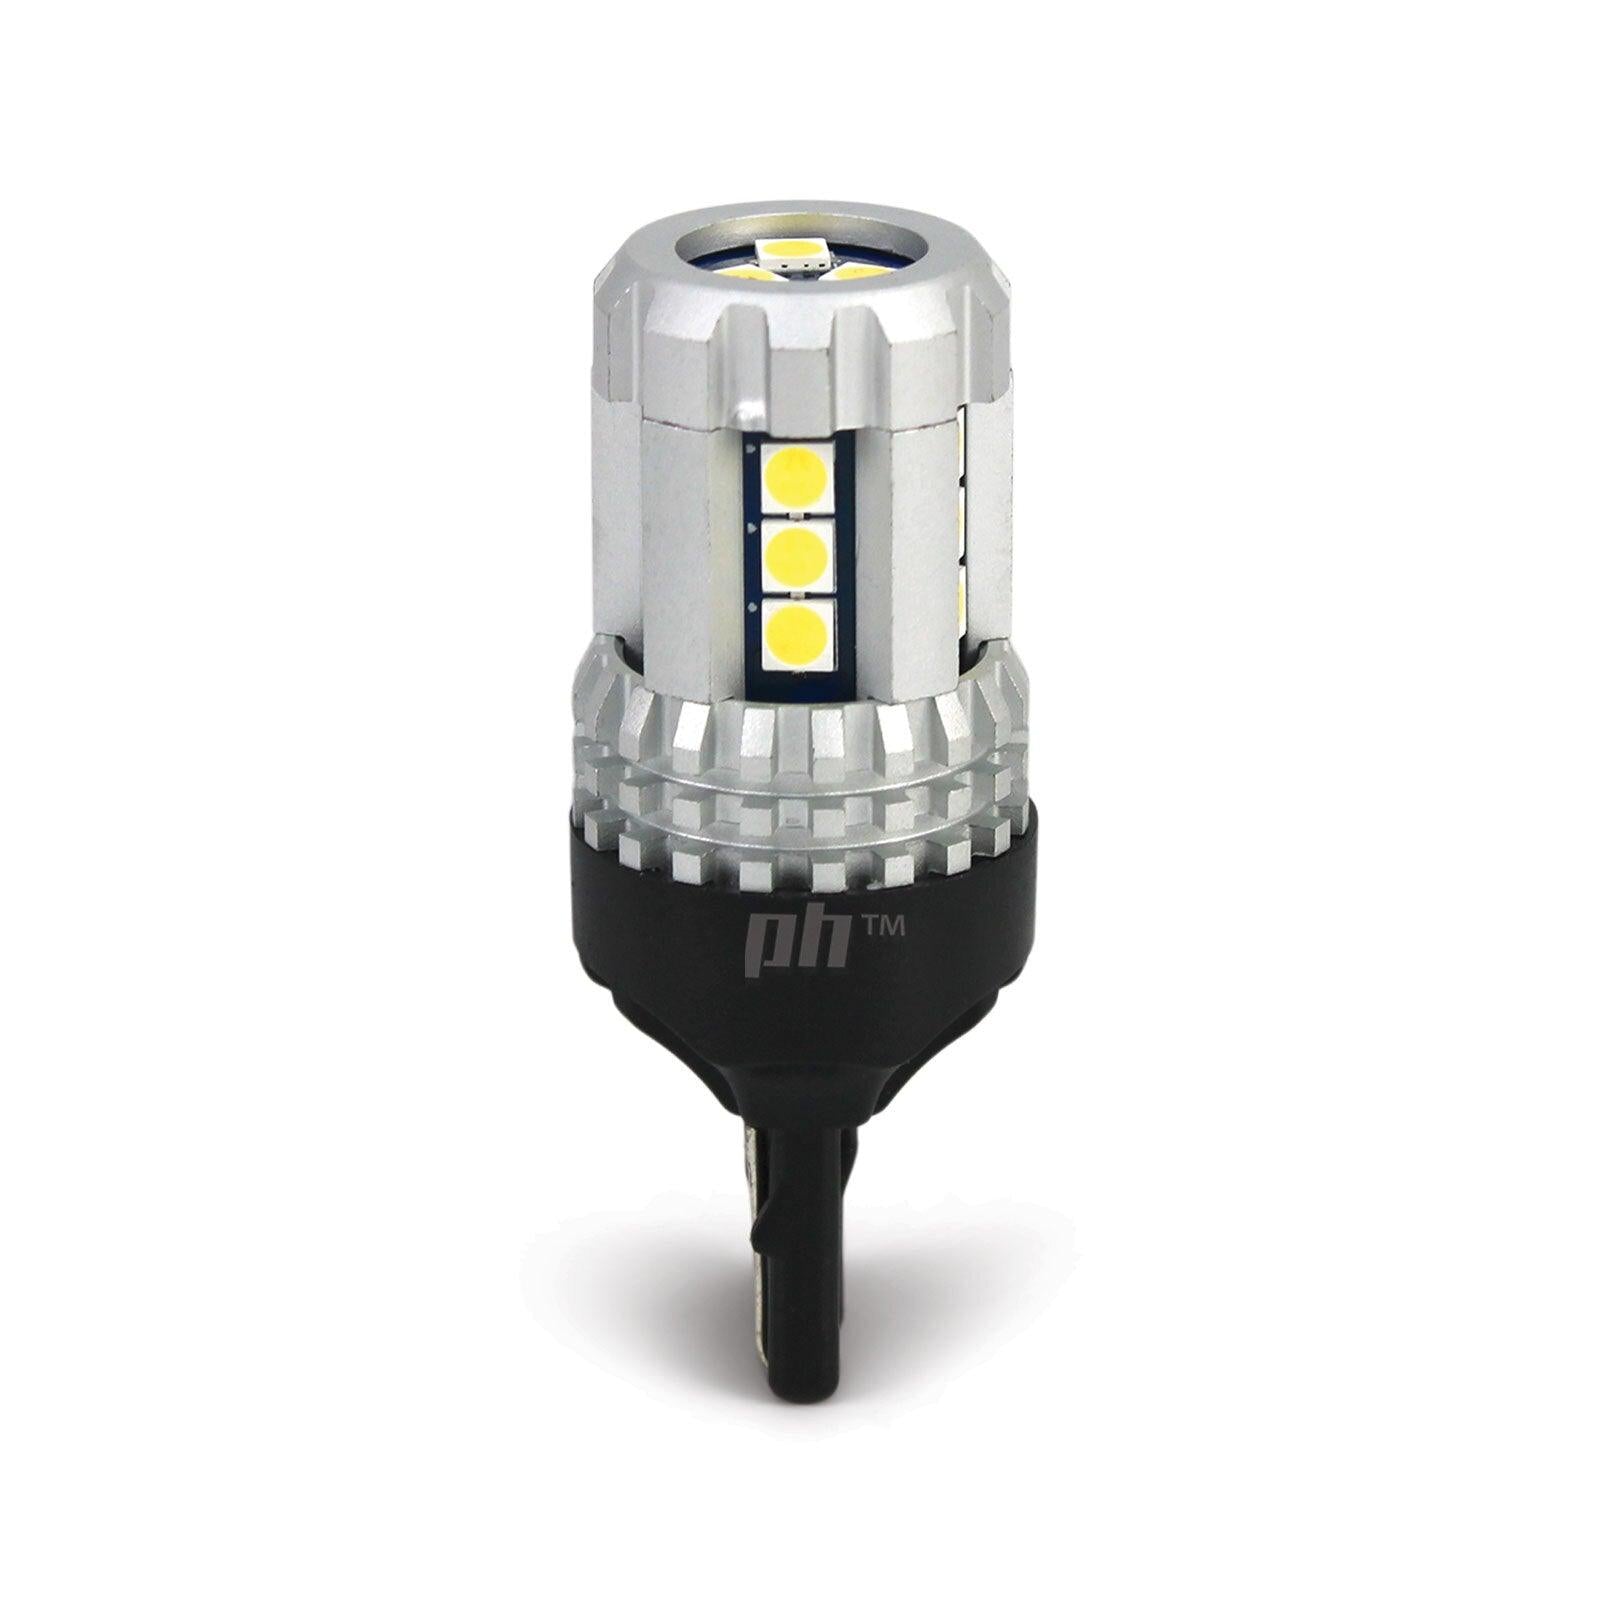 Panel House - T20 Wedge Style LED Bulbs White 6500k 500LM PAIR Park / Reverse - 4X4OC™ | 4x4 Offroad Centre